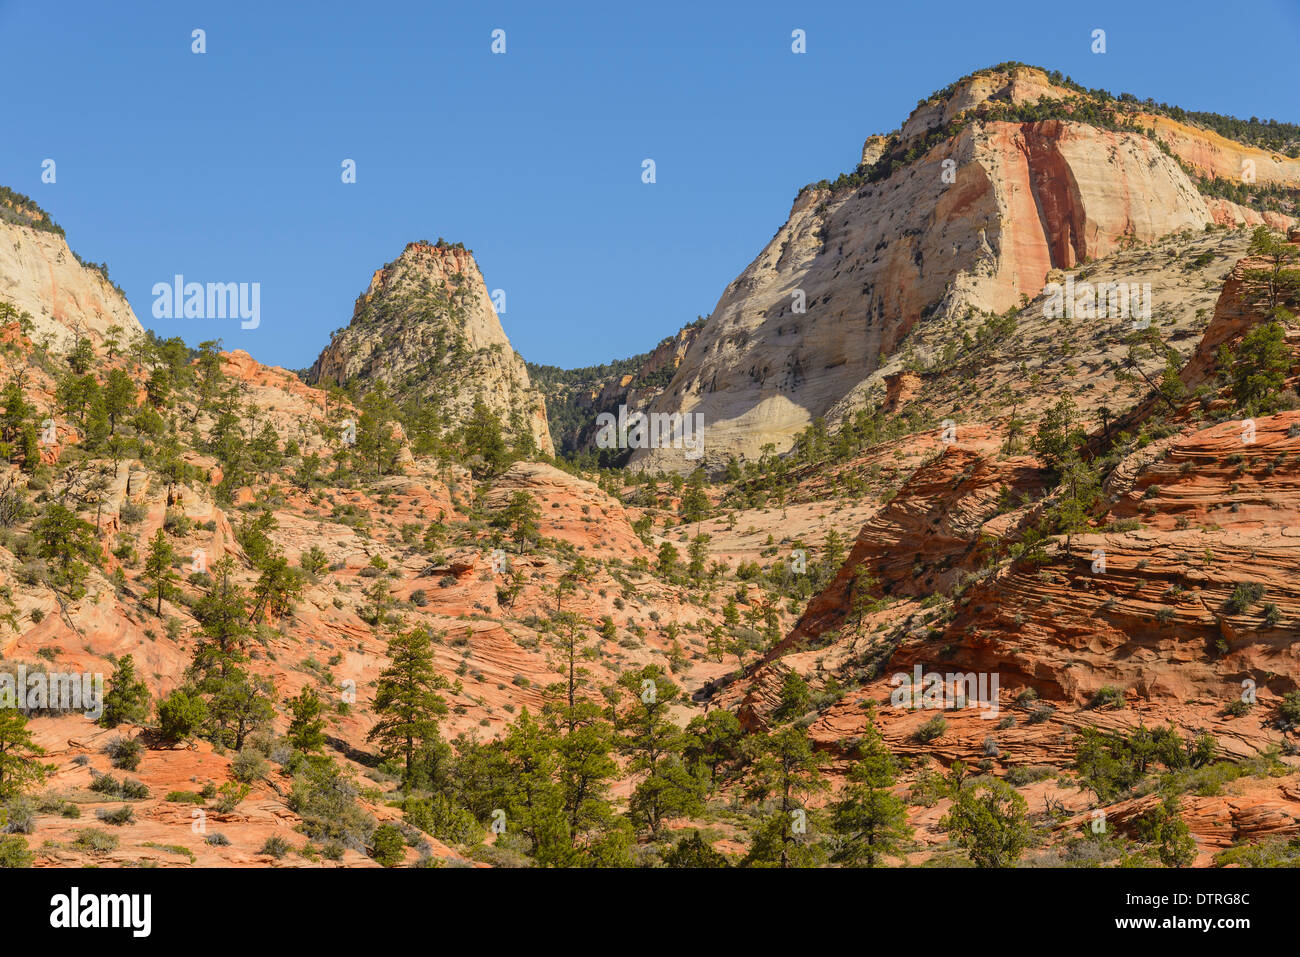 Zion Plateau, Eastern section of Zion National Park, Utah, USA Stock Photo